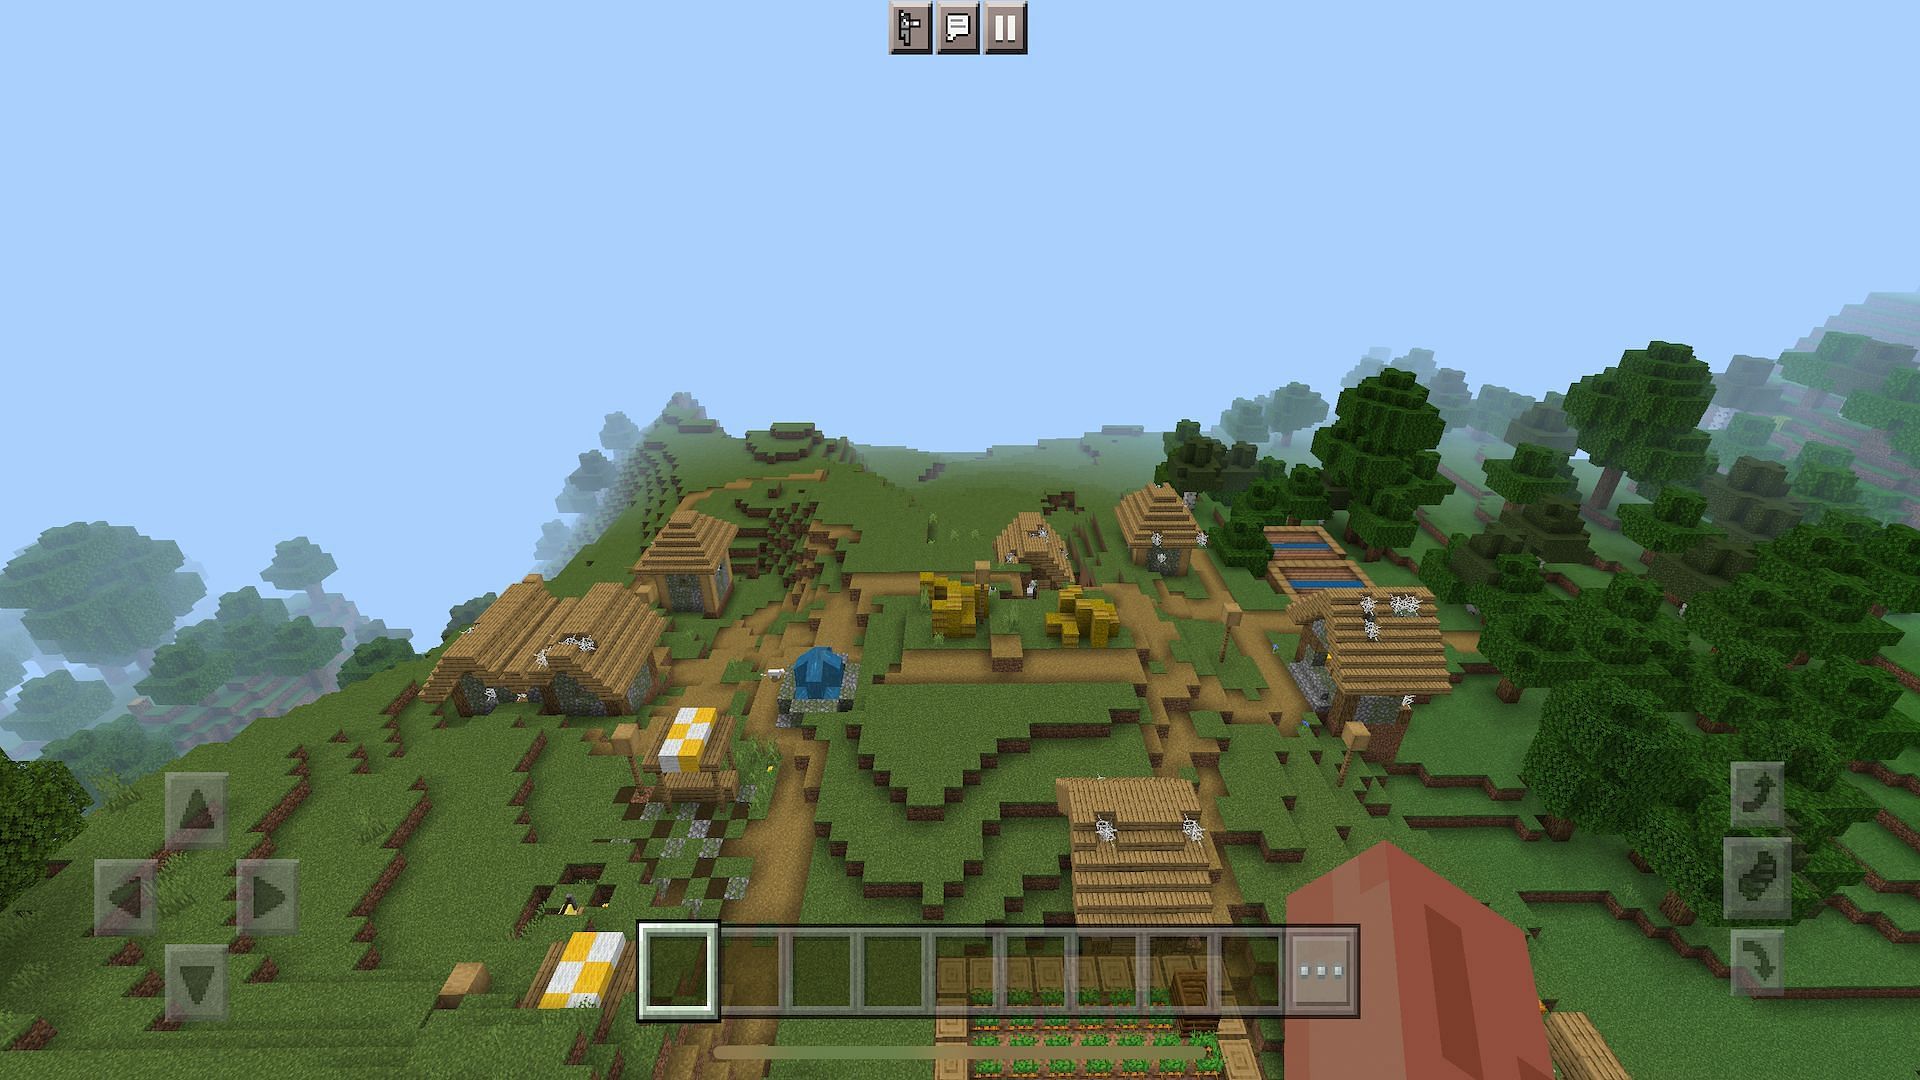 Players can find many different villages in this seed (Image via Minecraft)